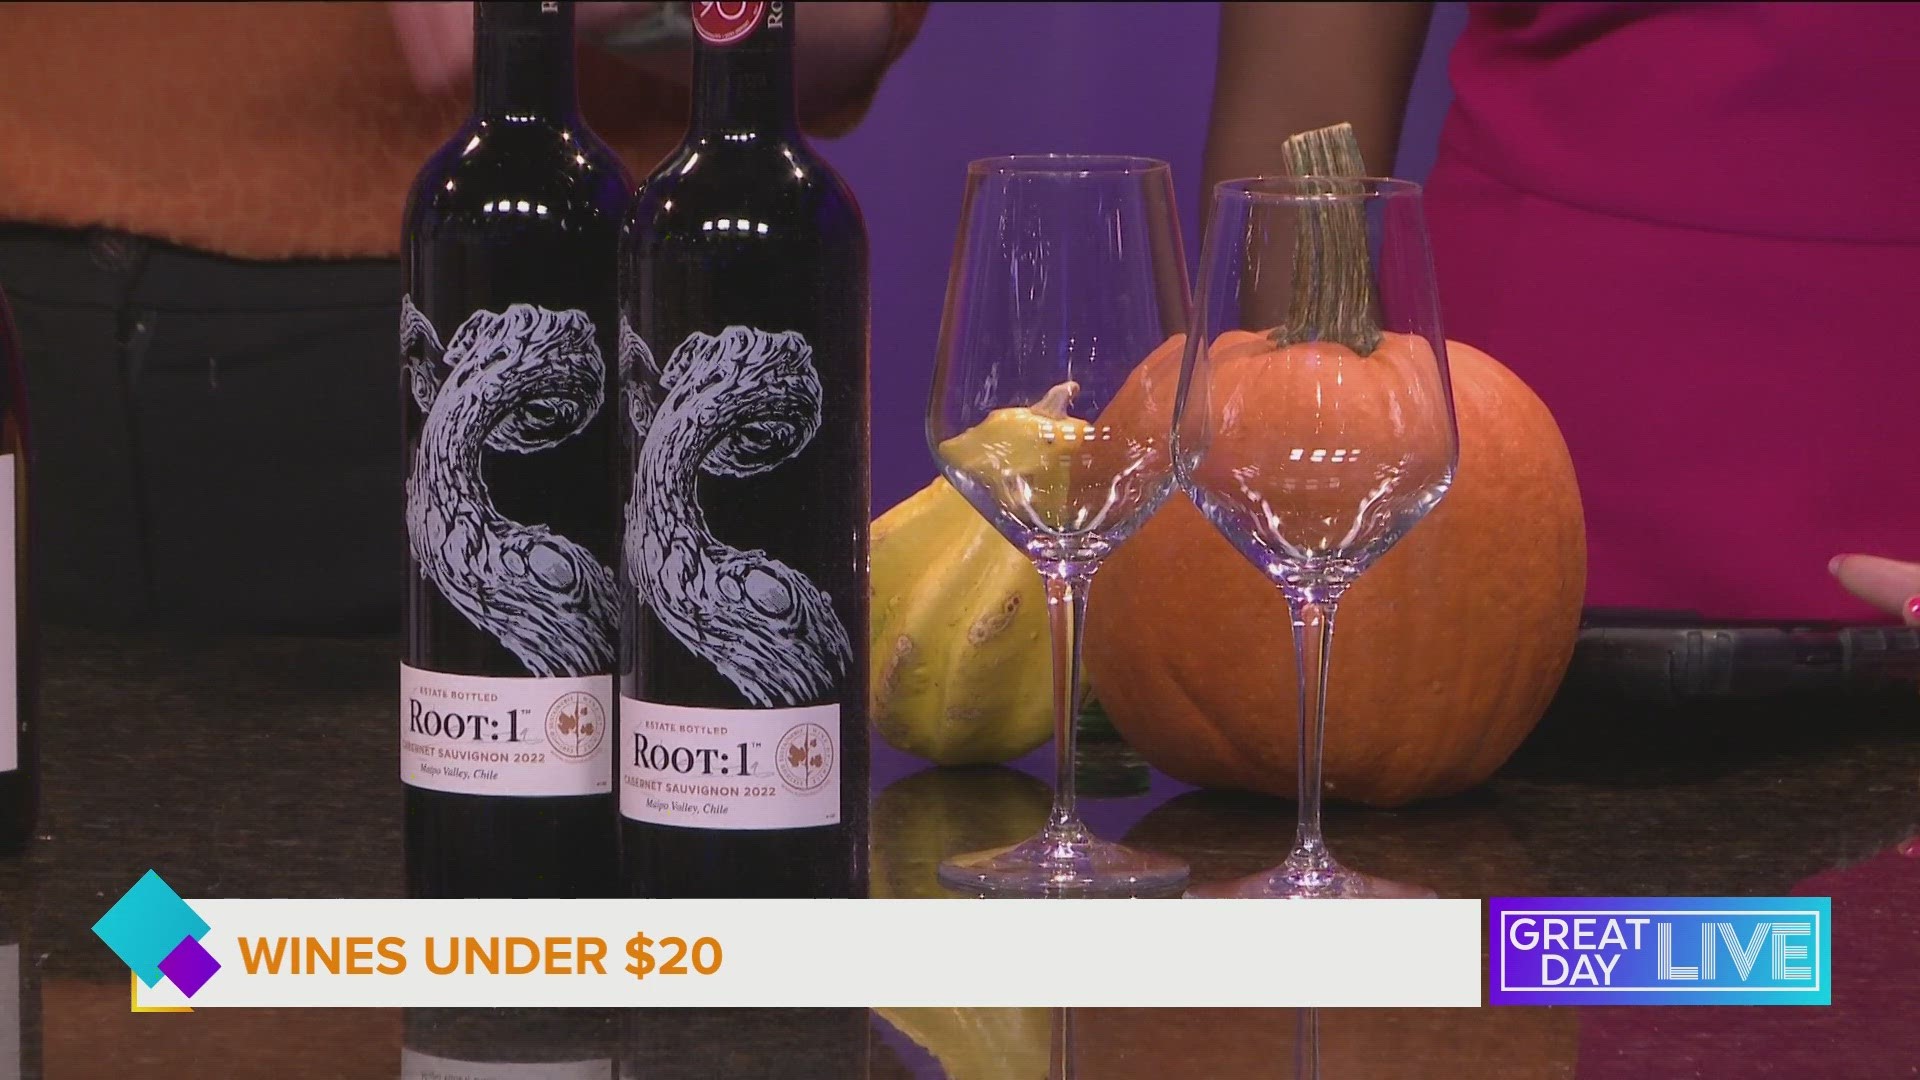 A certified specialist of wine introduces us two great bottles of wine that won't break the bank.